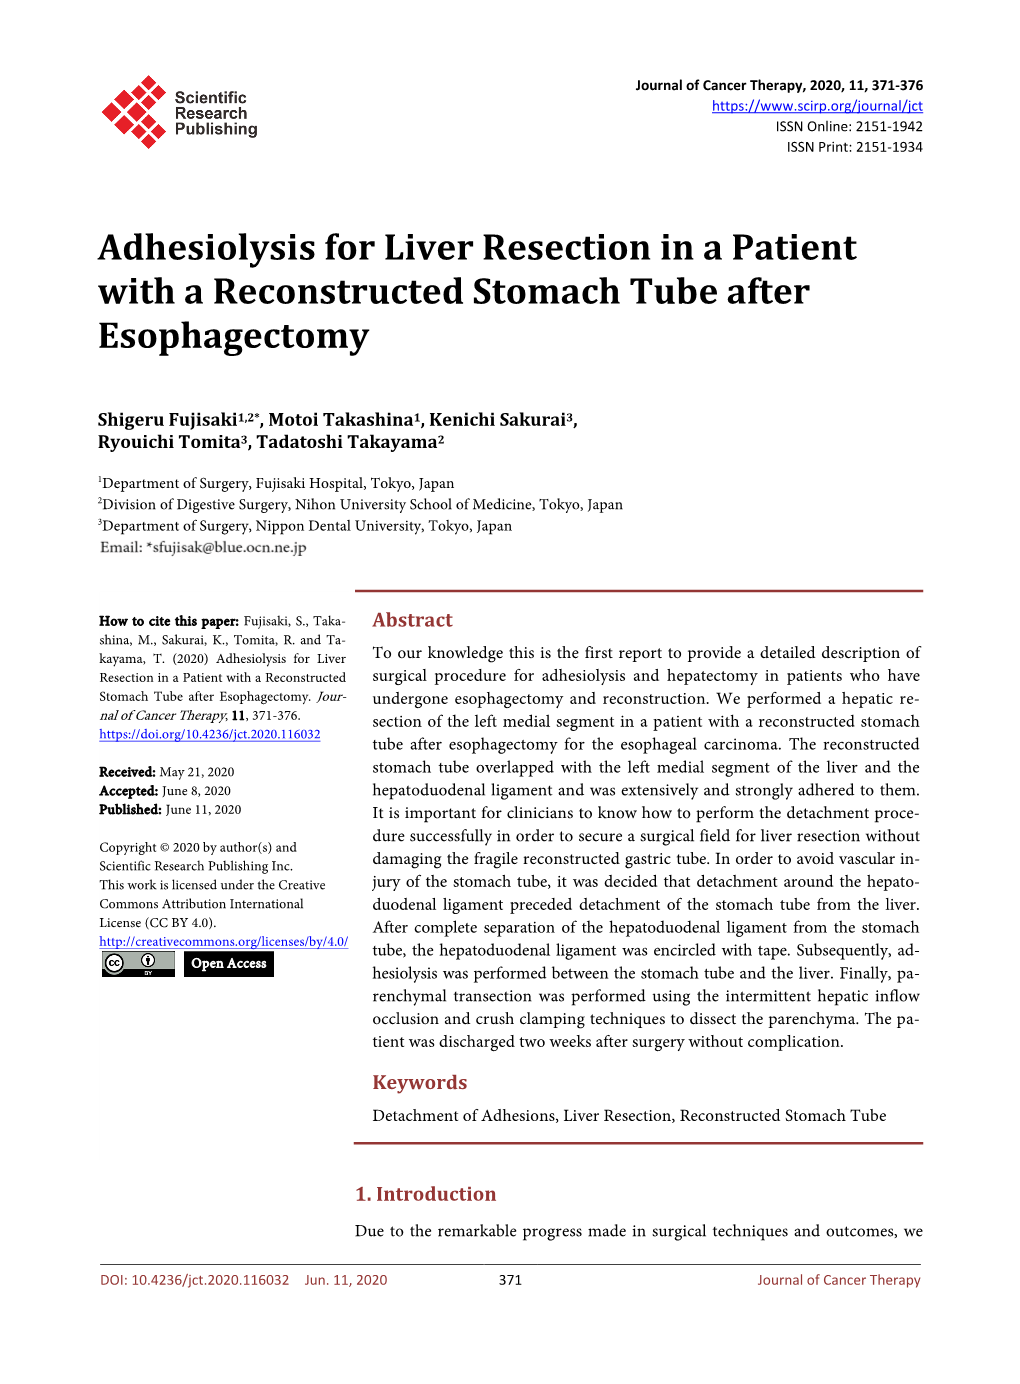 Adhesiolysis for Liver Resection in a Patient with a Reconstructed Stomach Tube After Esophagectomy